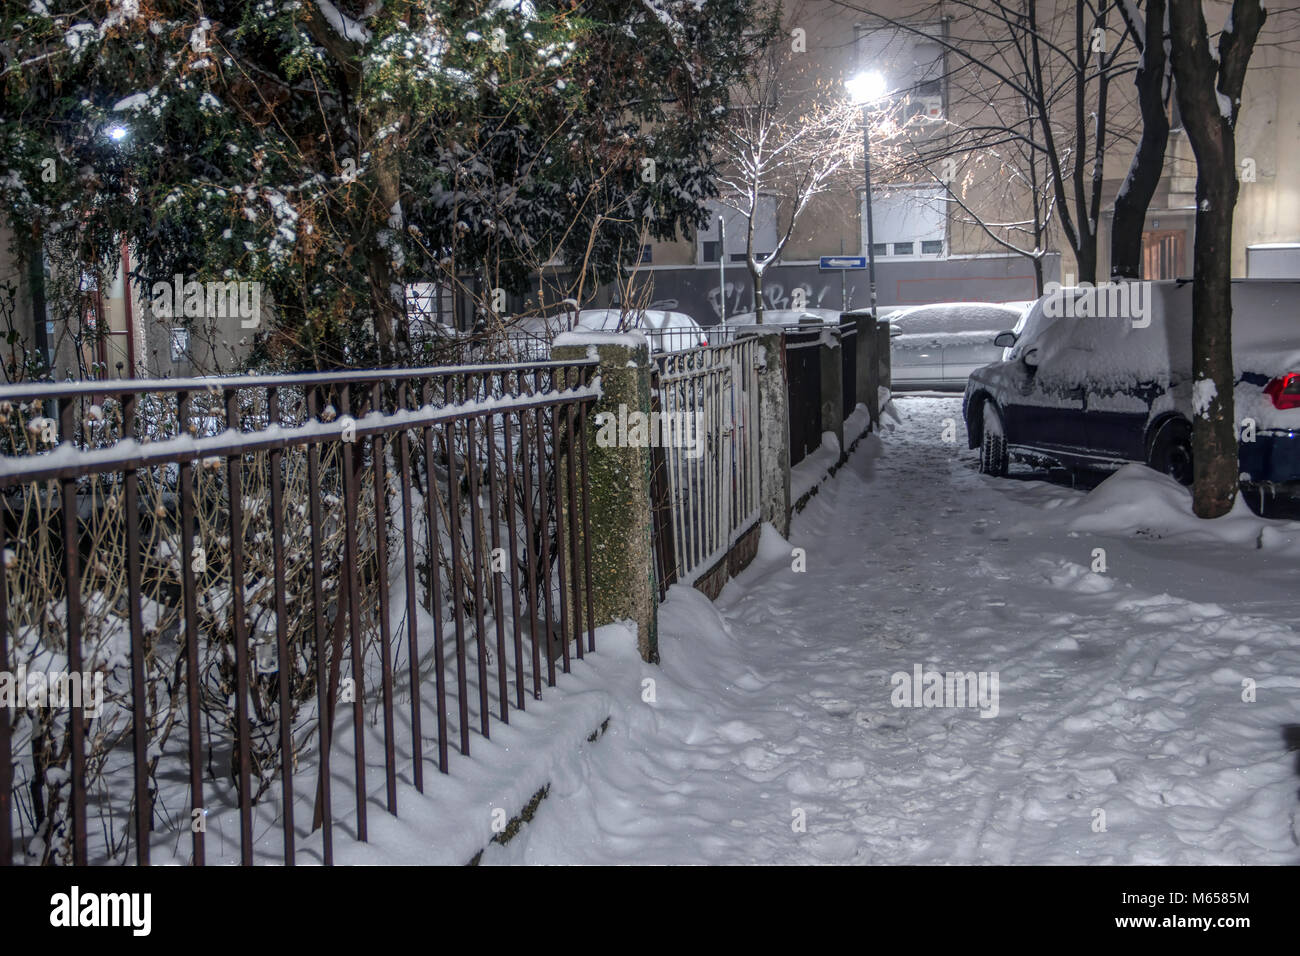 ZEMUN, BELGRADE, SERBIA, FEBRUARY 2018 - Snow covered street in a residential area at night Stock Photo